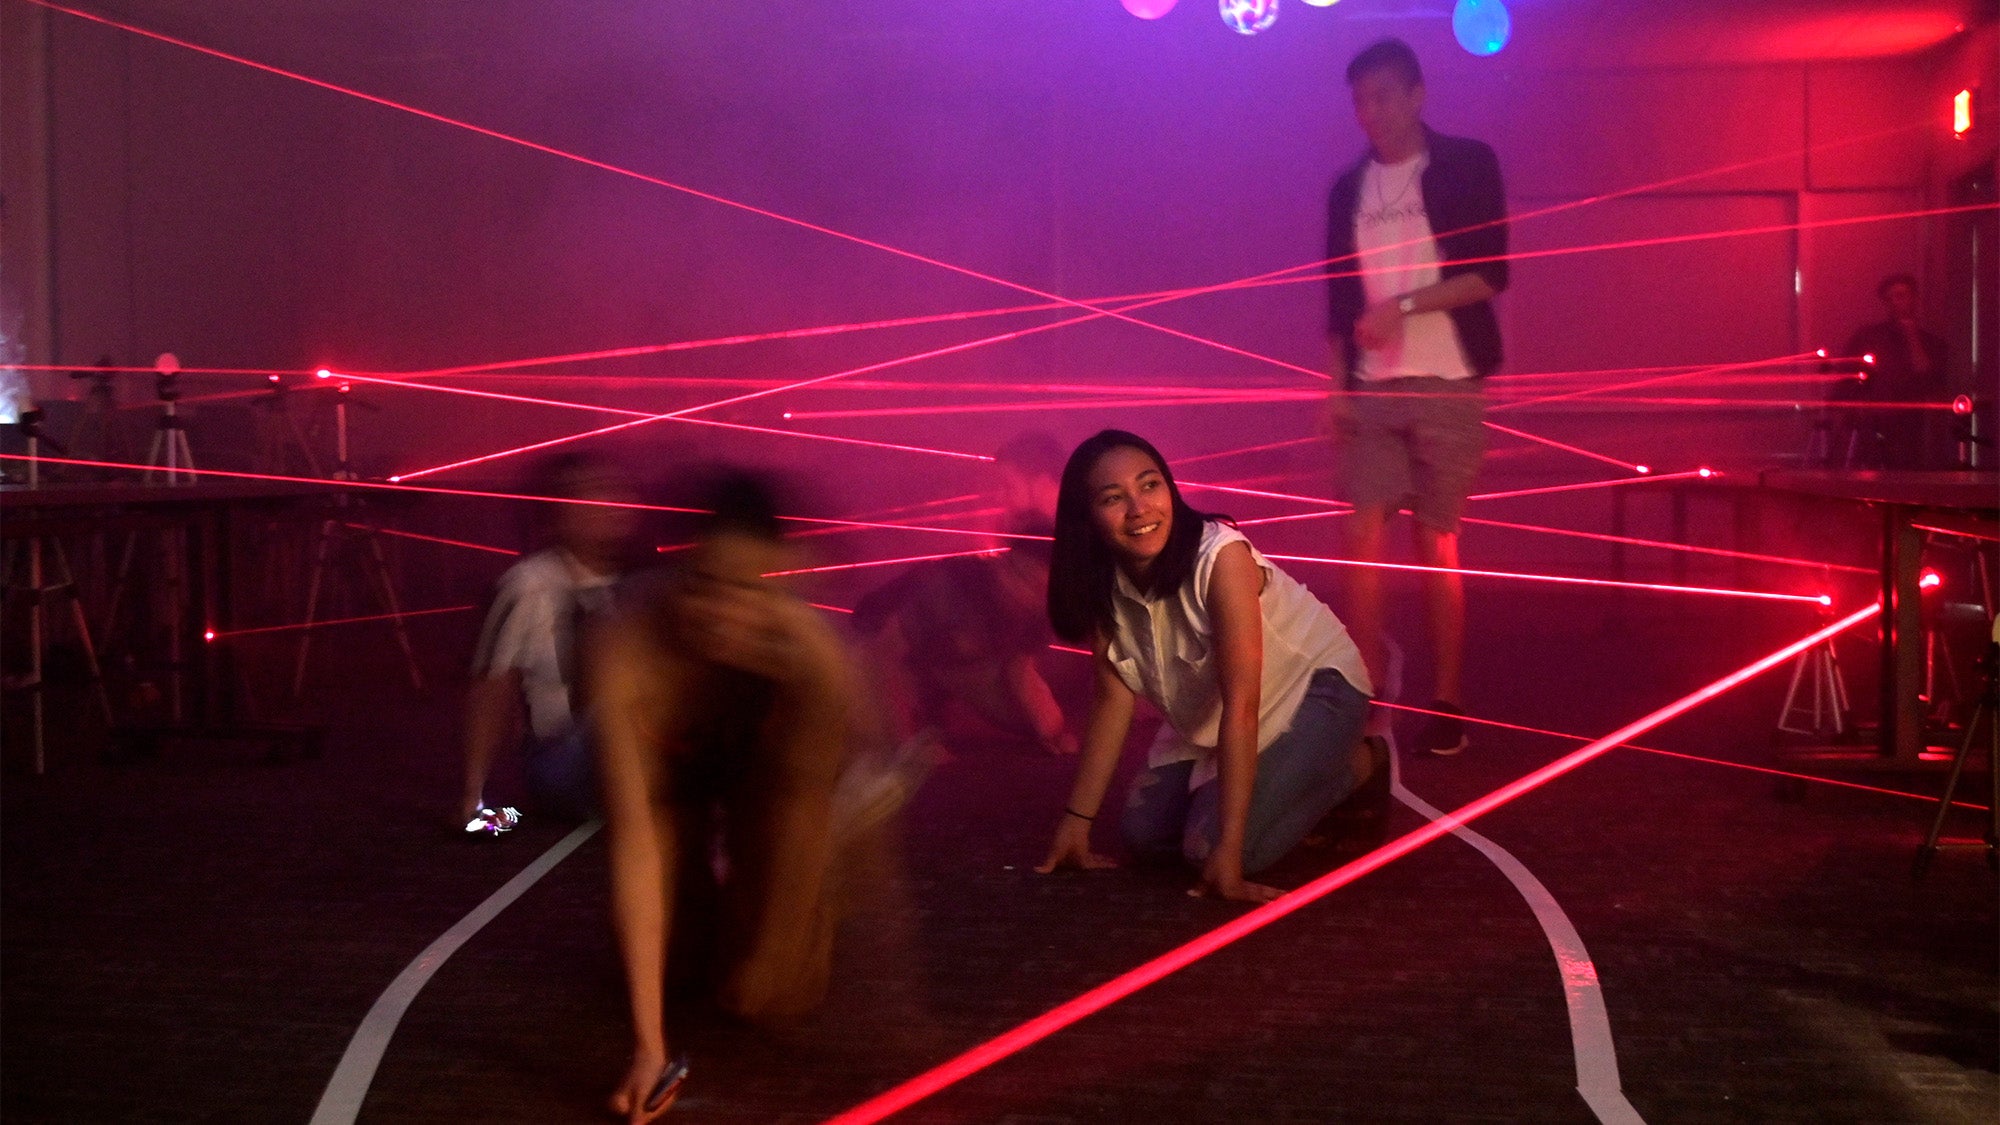 Students navigate through a dark room filled with laser beams.